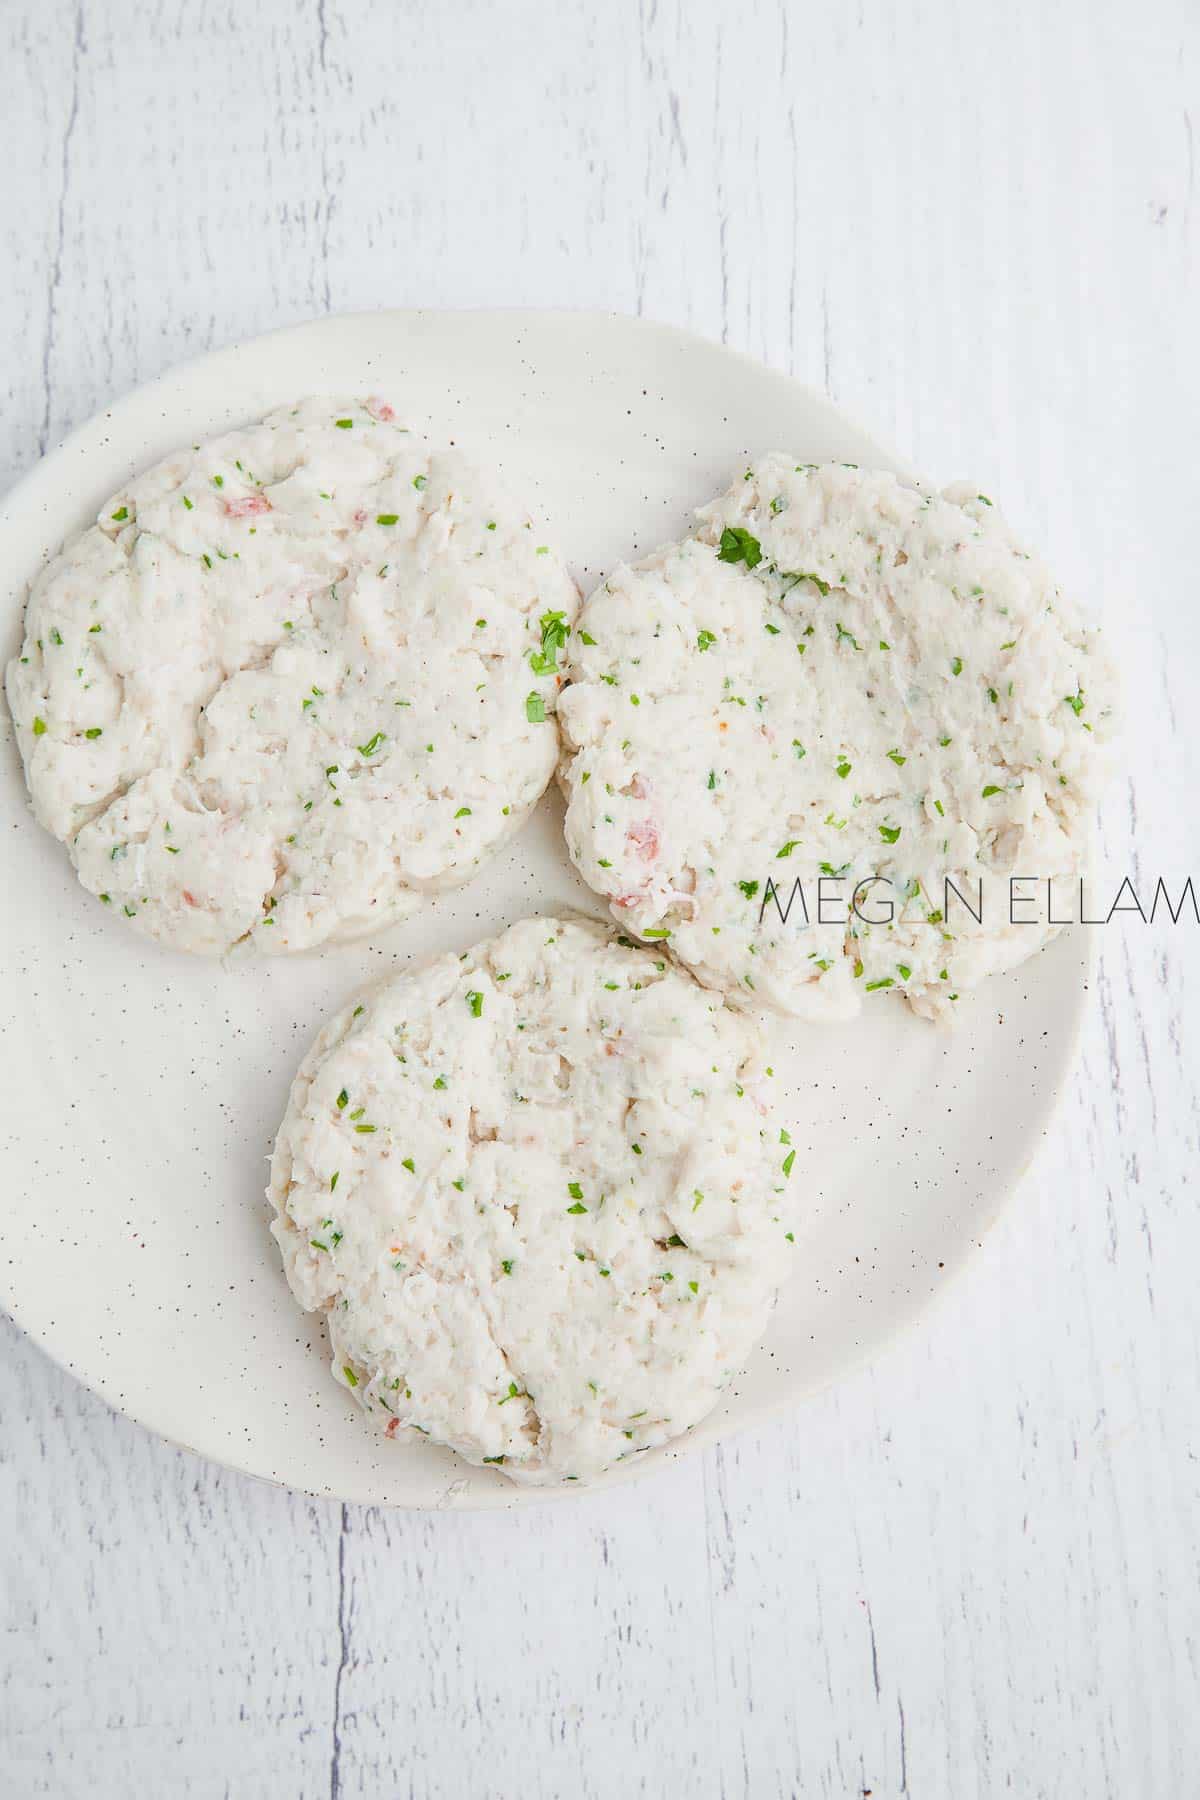 a speckled plate with three raw, uncoated fish cakes